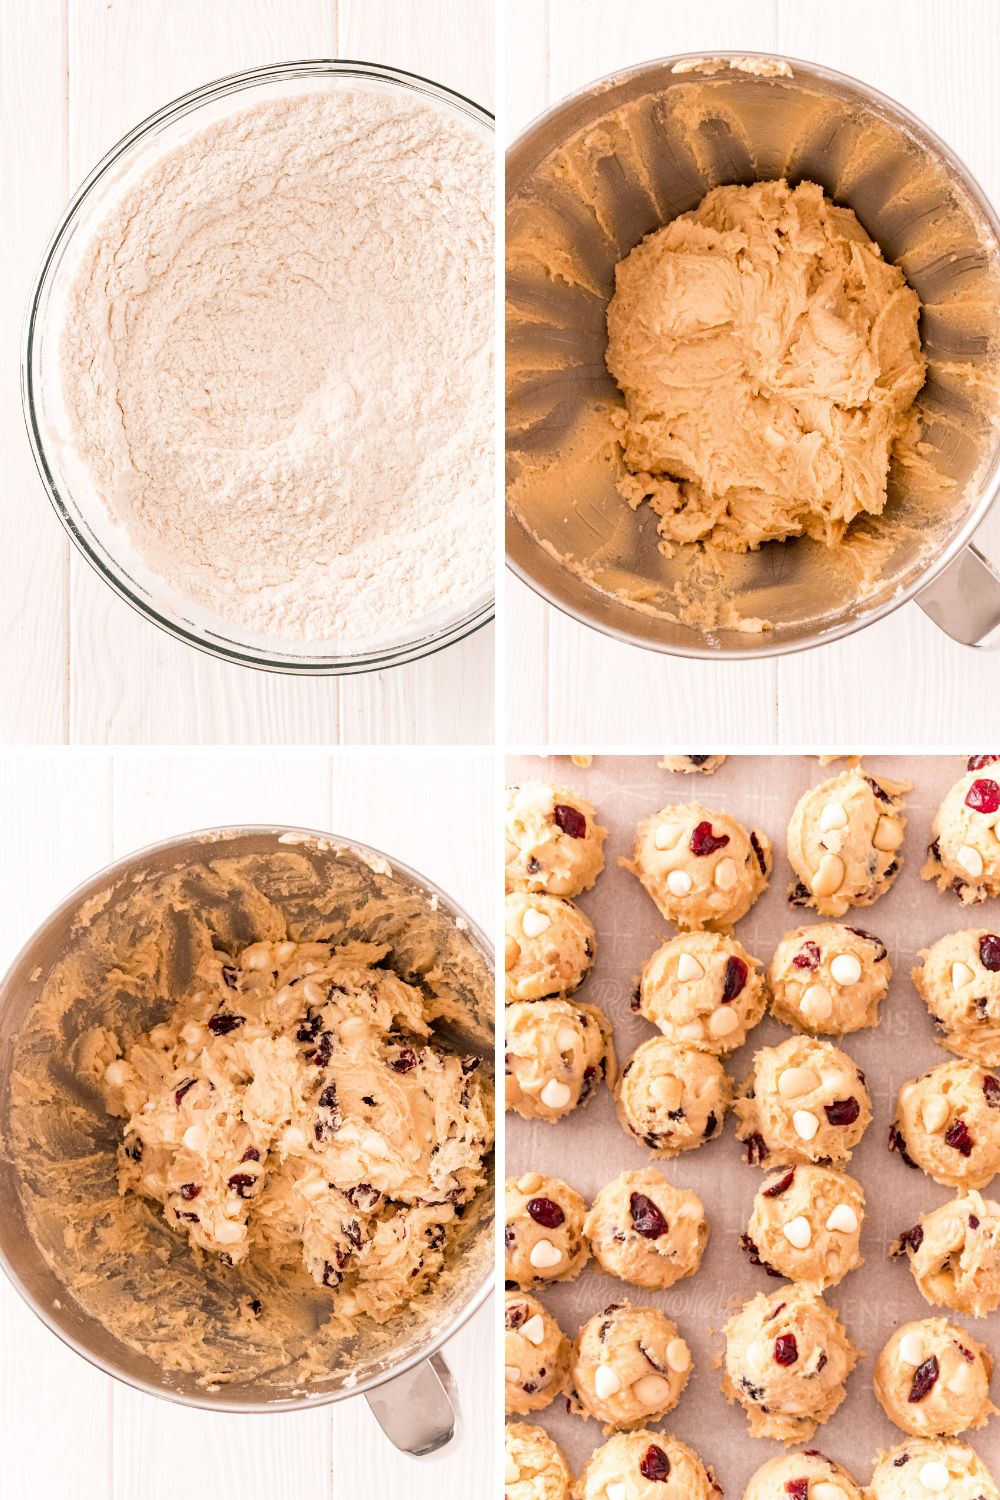 Directions to make Cranberry White Chocolate Macadamia Nut Cookies